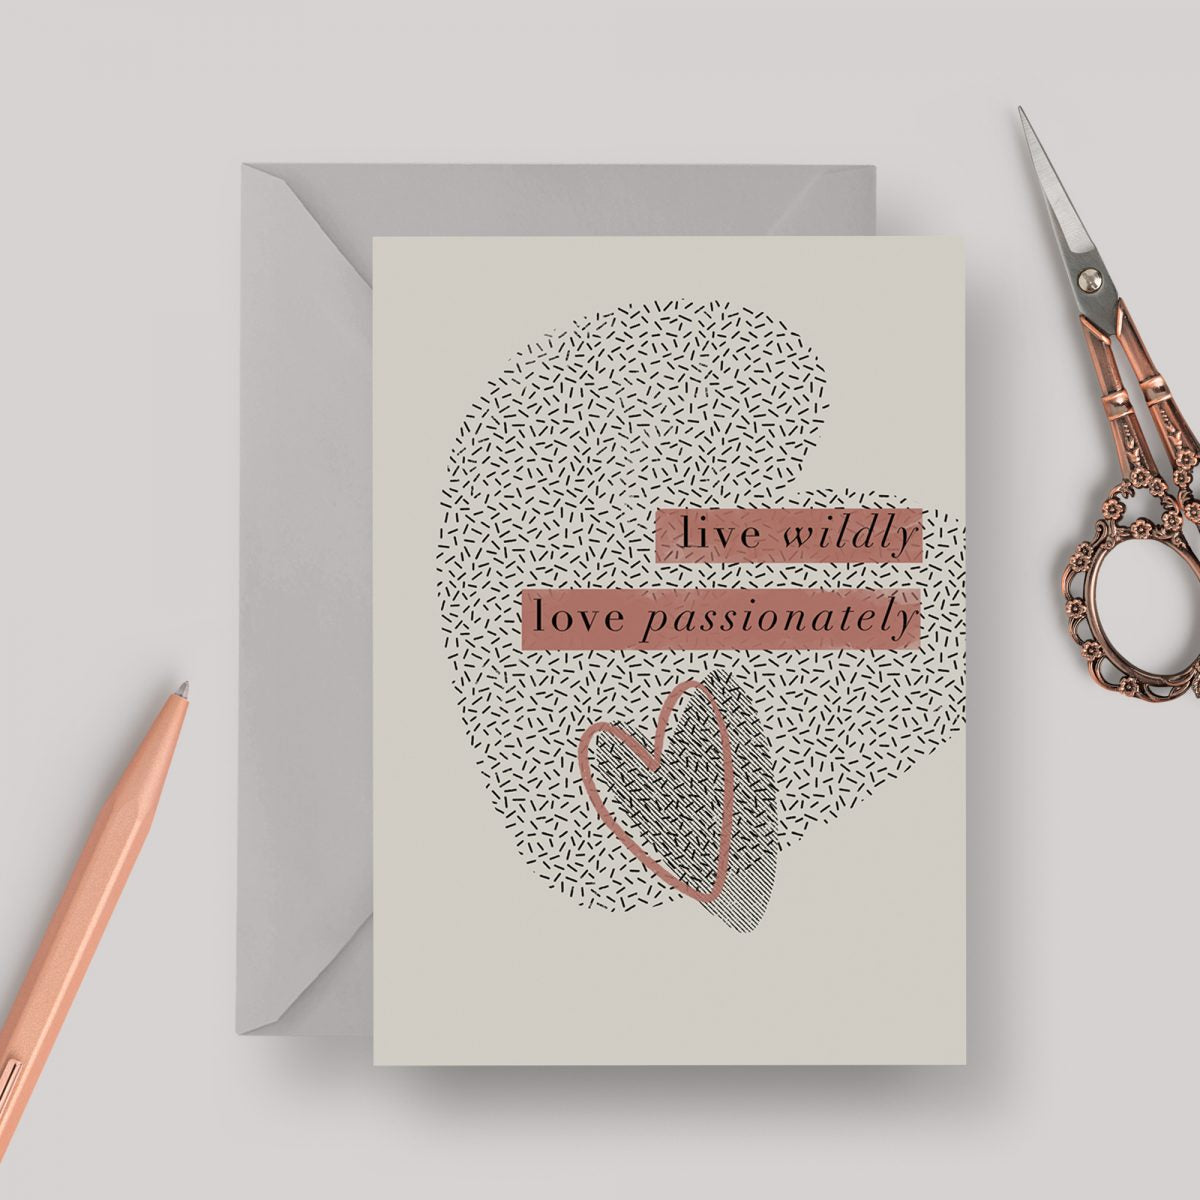 Live Wildly A6 greeting card with grey envelope